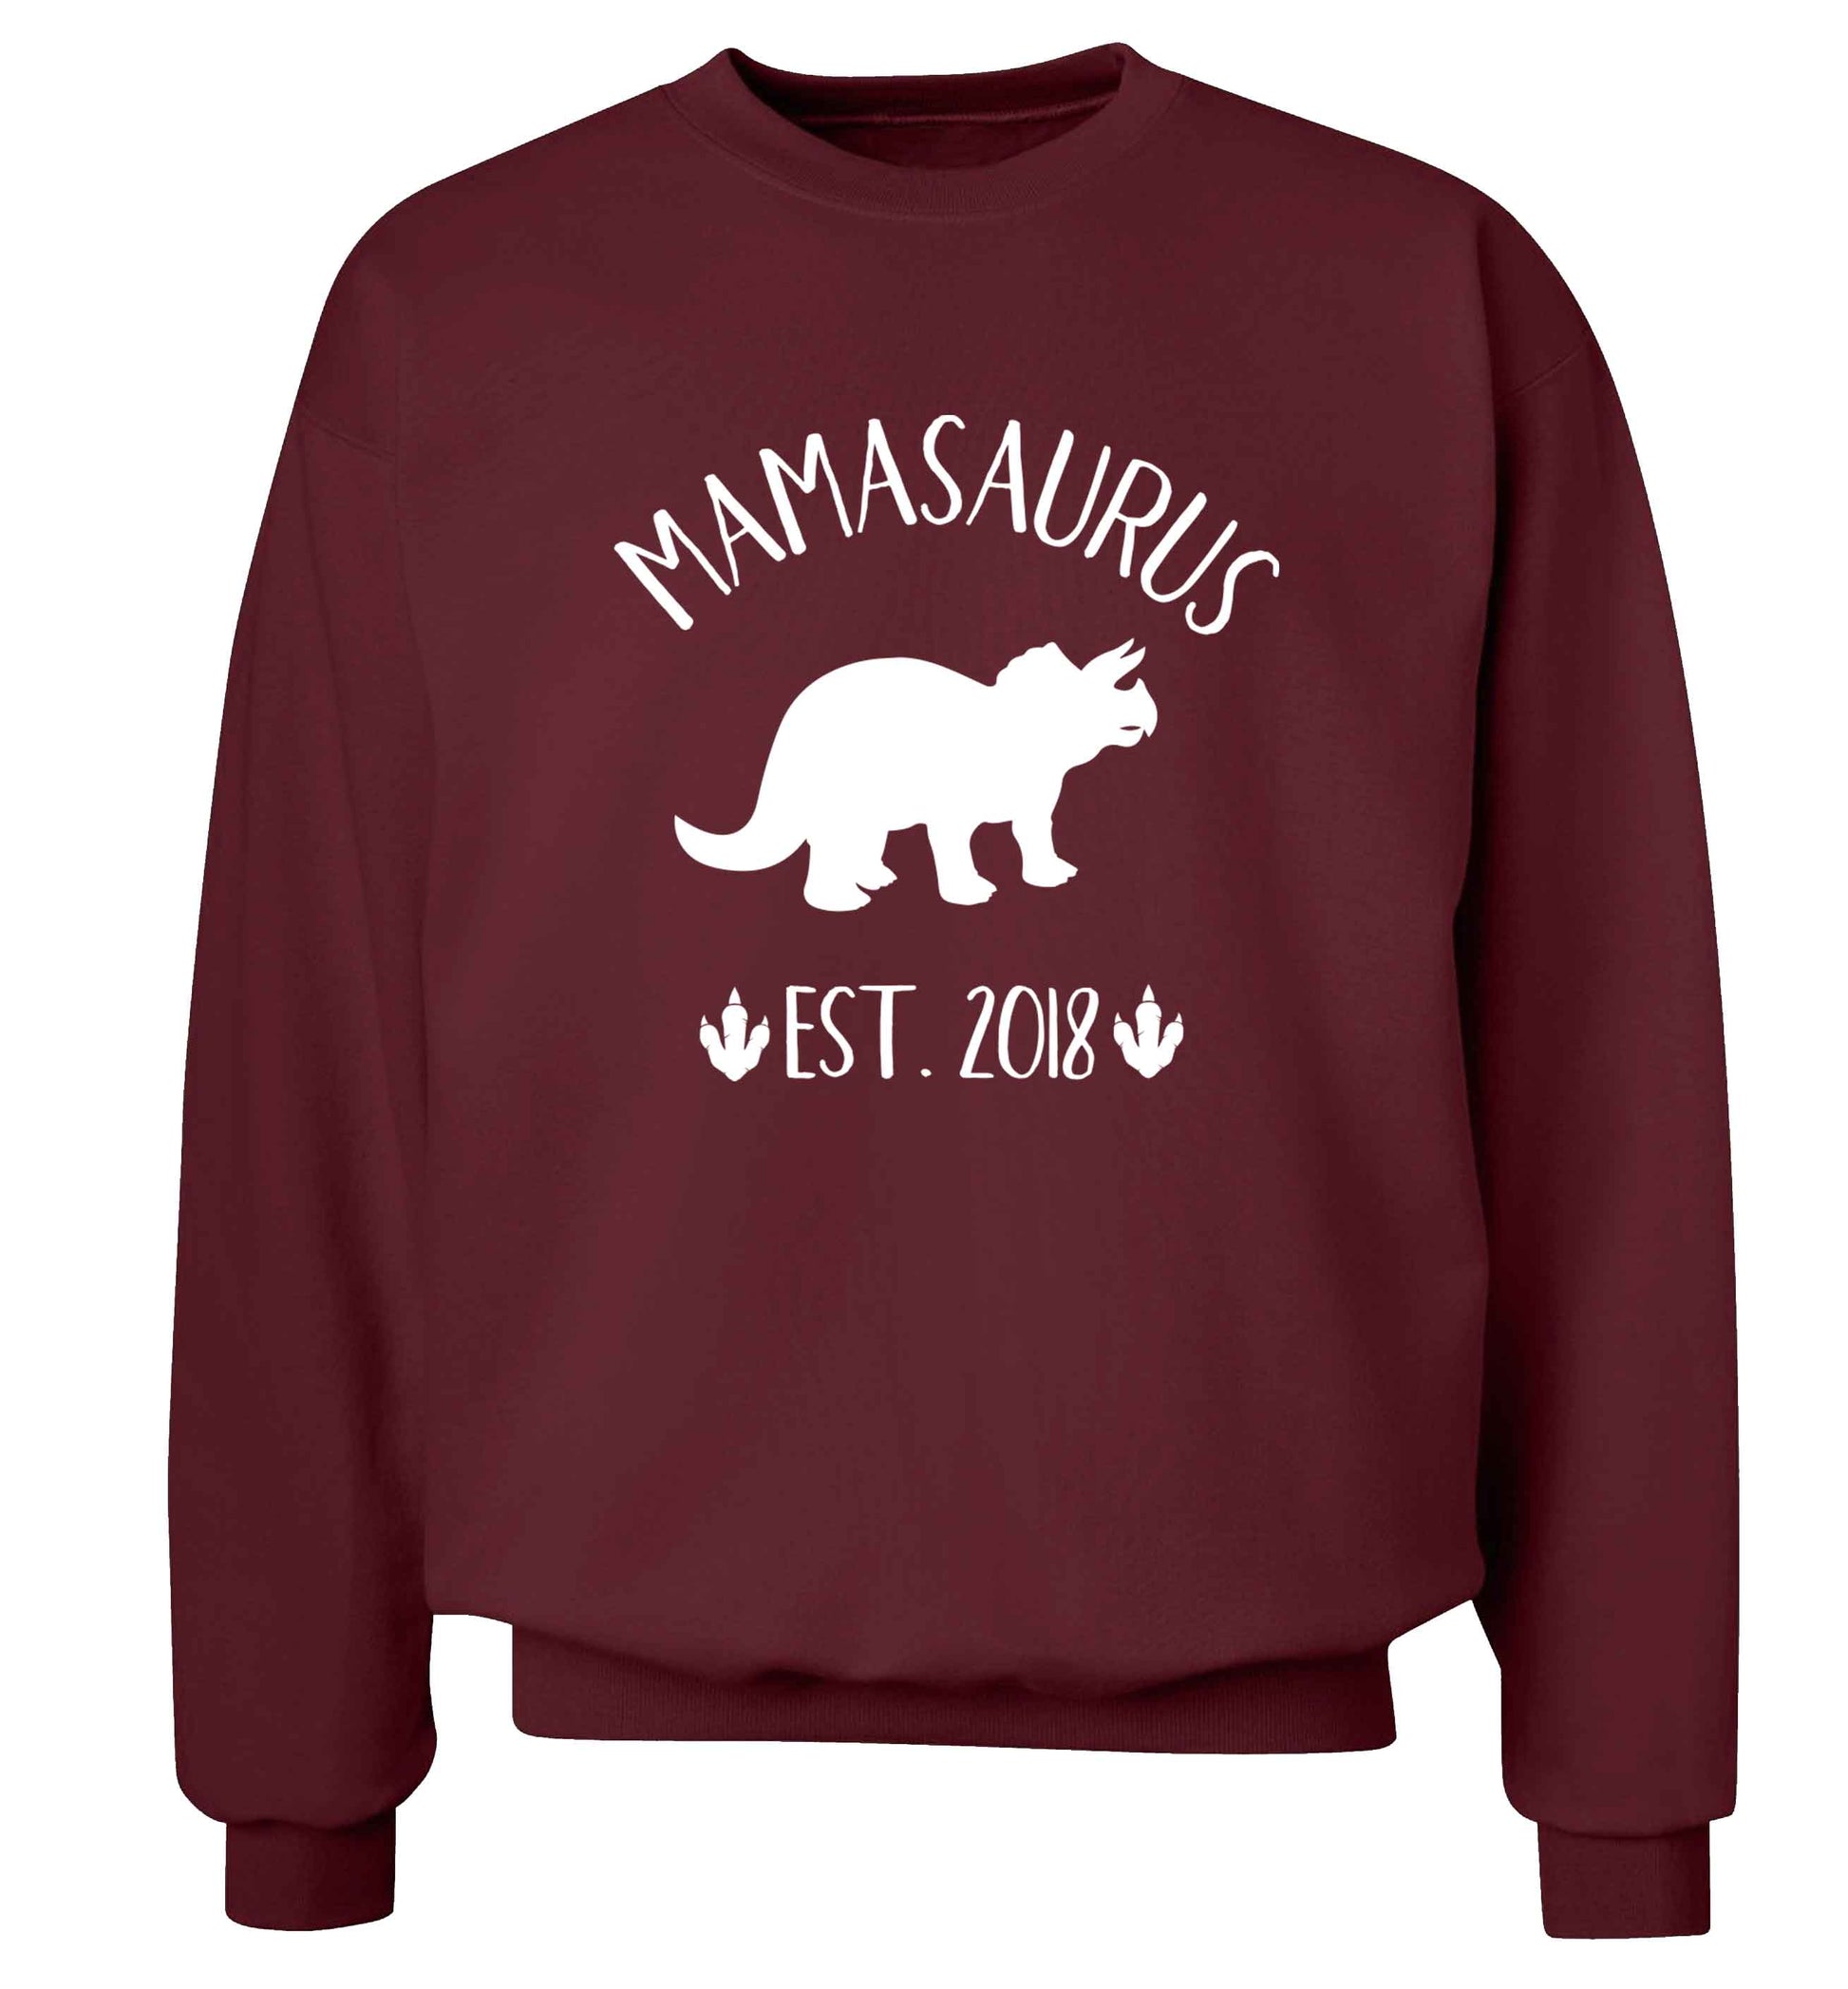 Personalised mamasaurus date adult's unisex maroon sweater 2XL